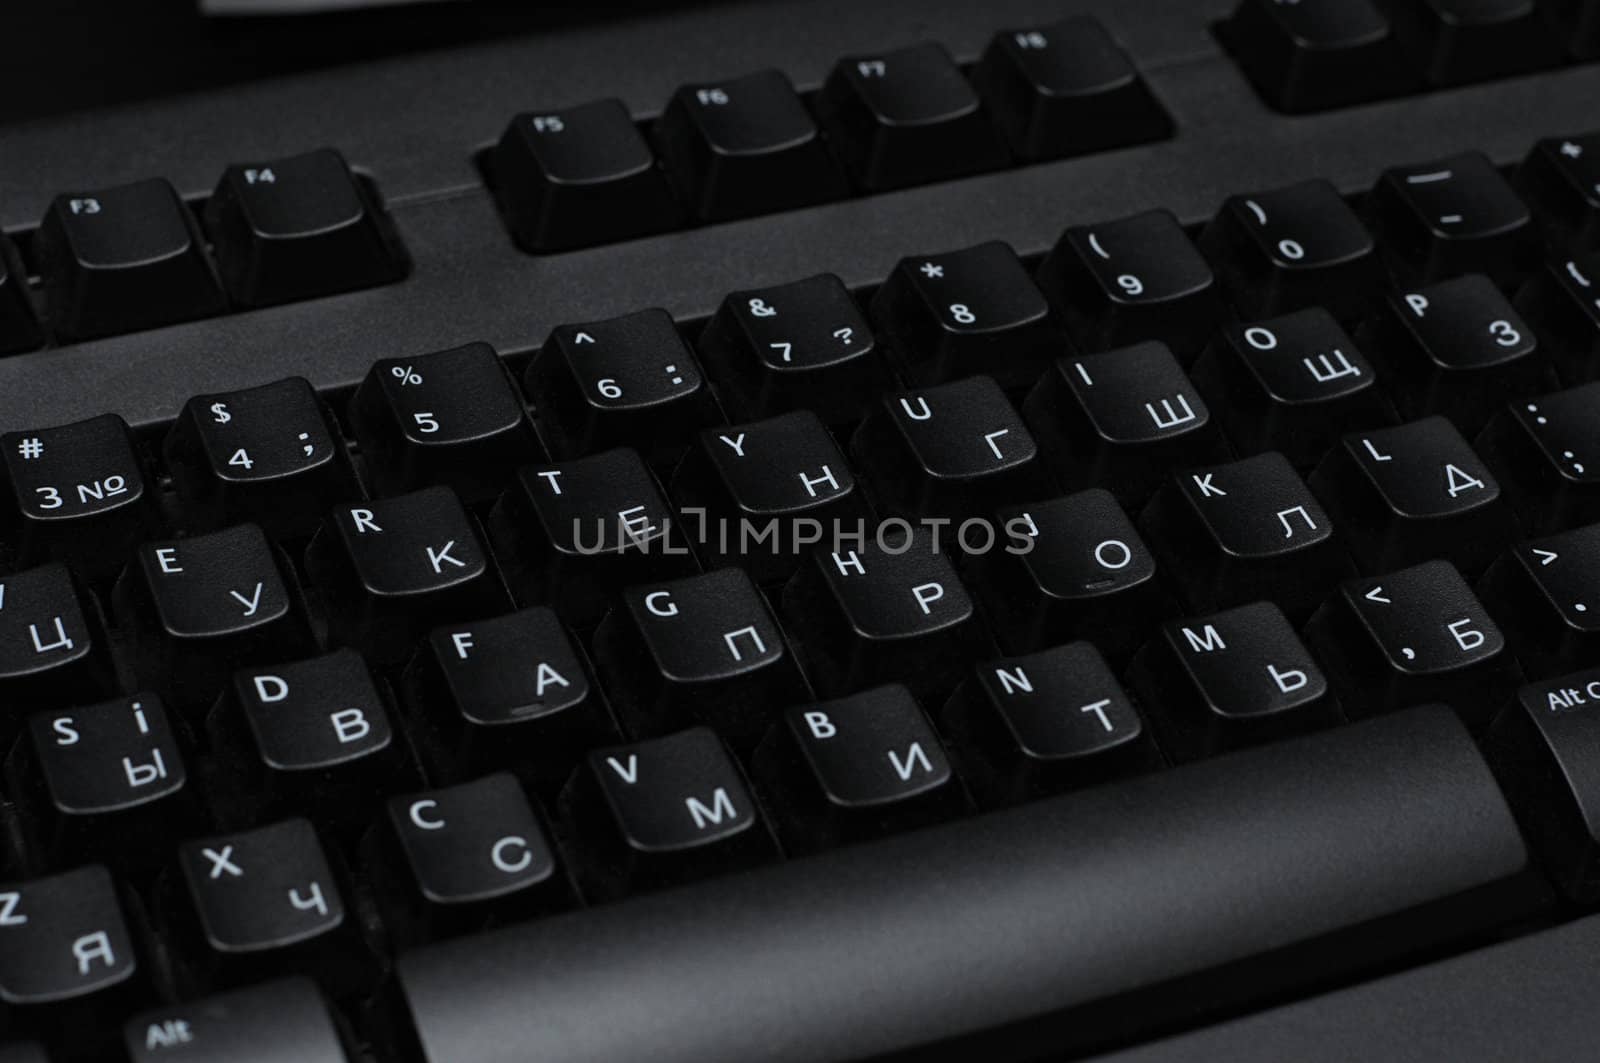 PC keyboard of black color close up view